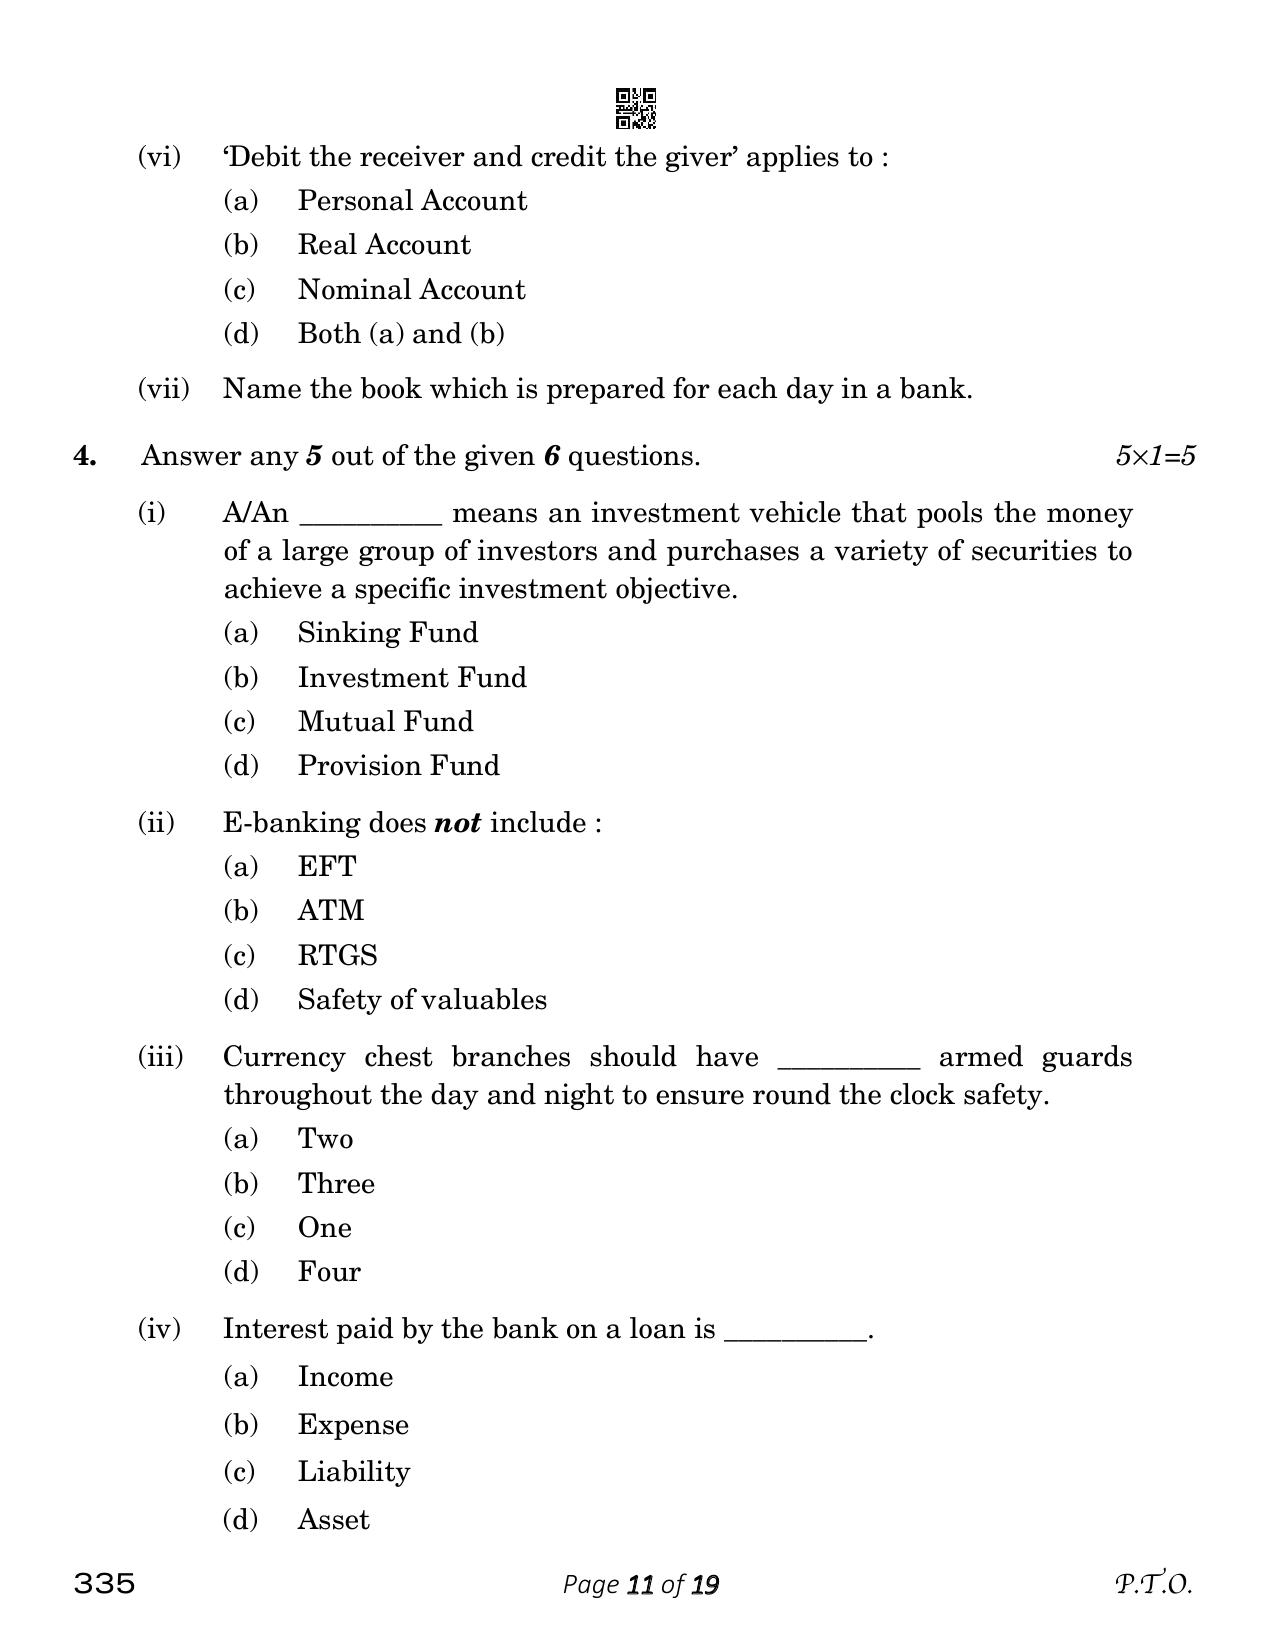 CBSE Class 12 Banking (Compartment) 2023 Question Paper - Page 11